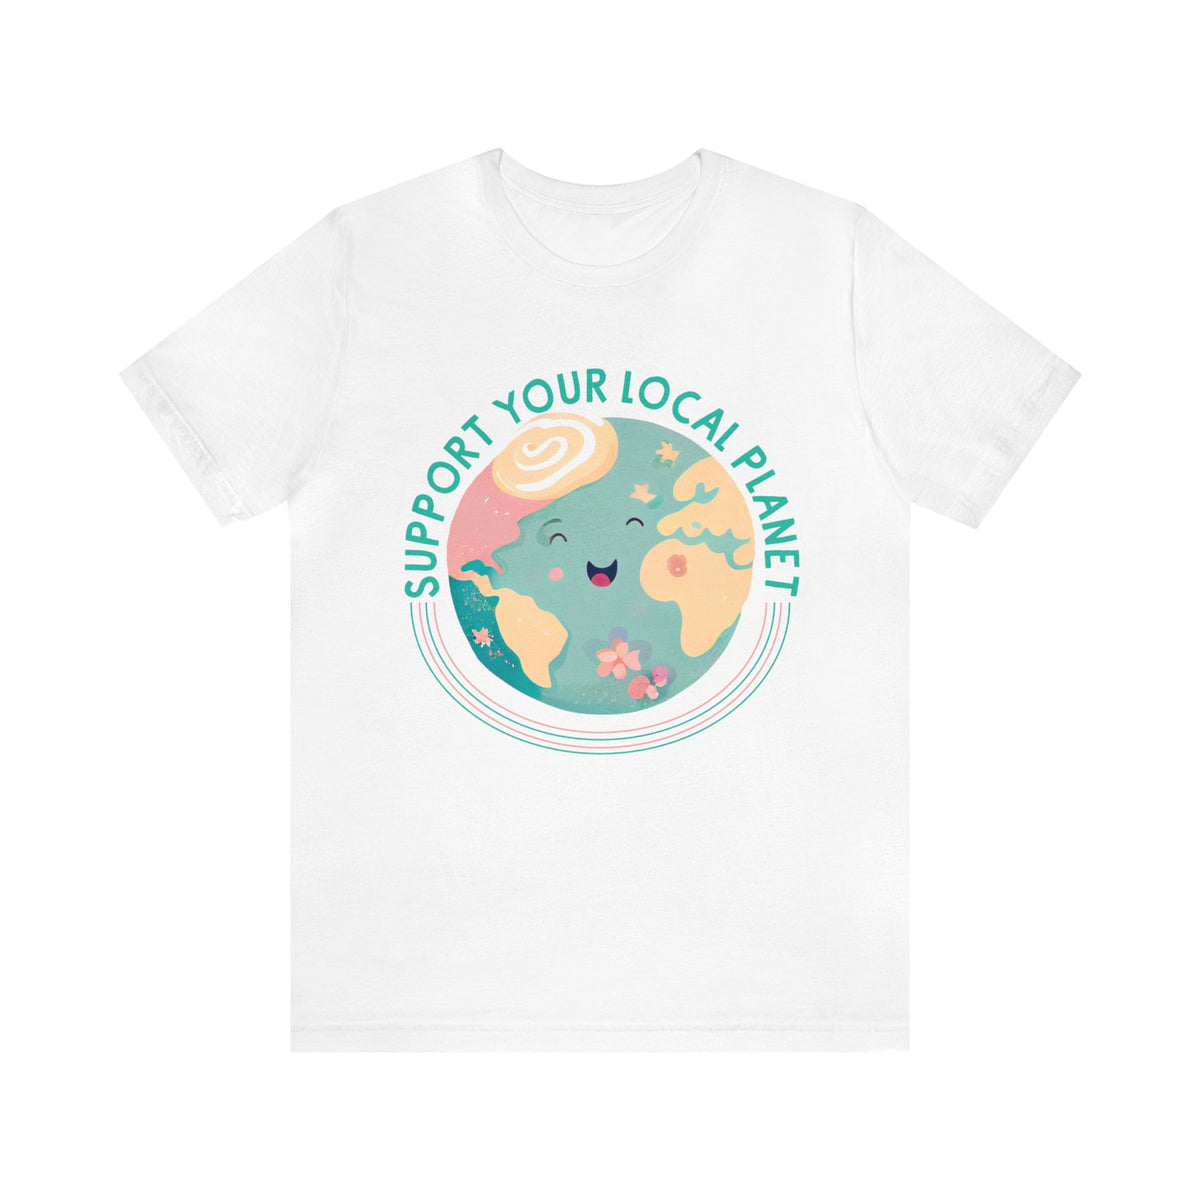 Support Your Local Planet Earth Day Shirt | Kawaii Style shirt | Nature Shirt | Gift For Her | Super Soft Shirt | Unisex Jersey T-shirt